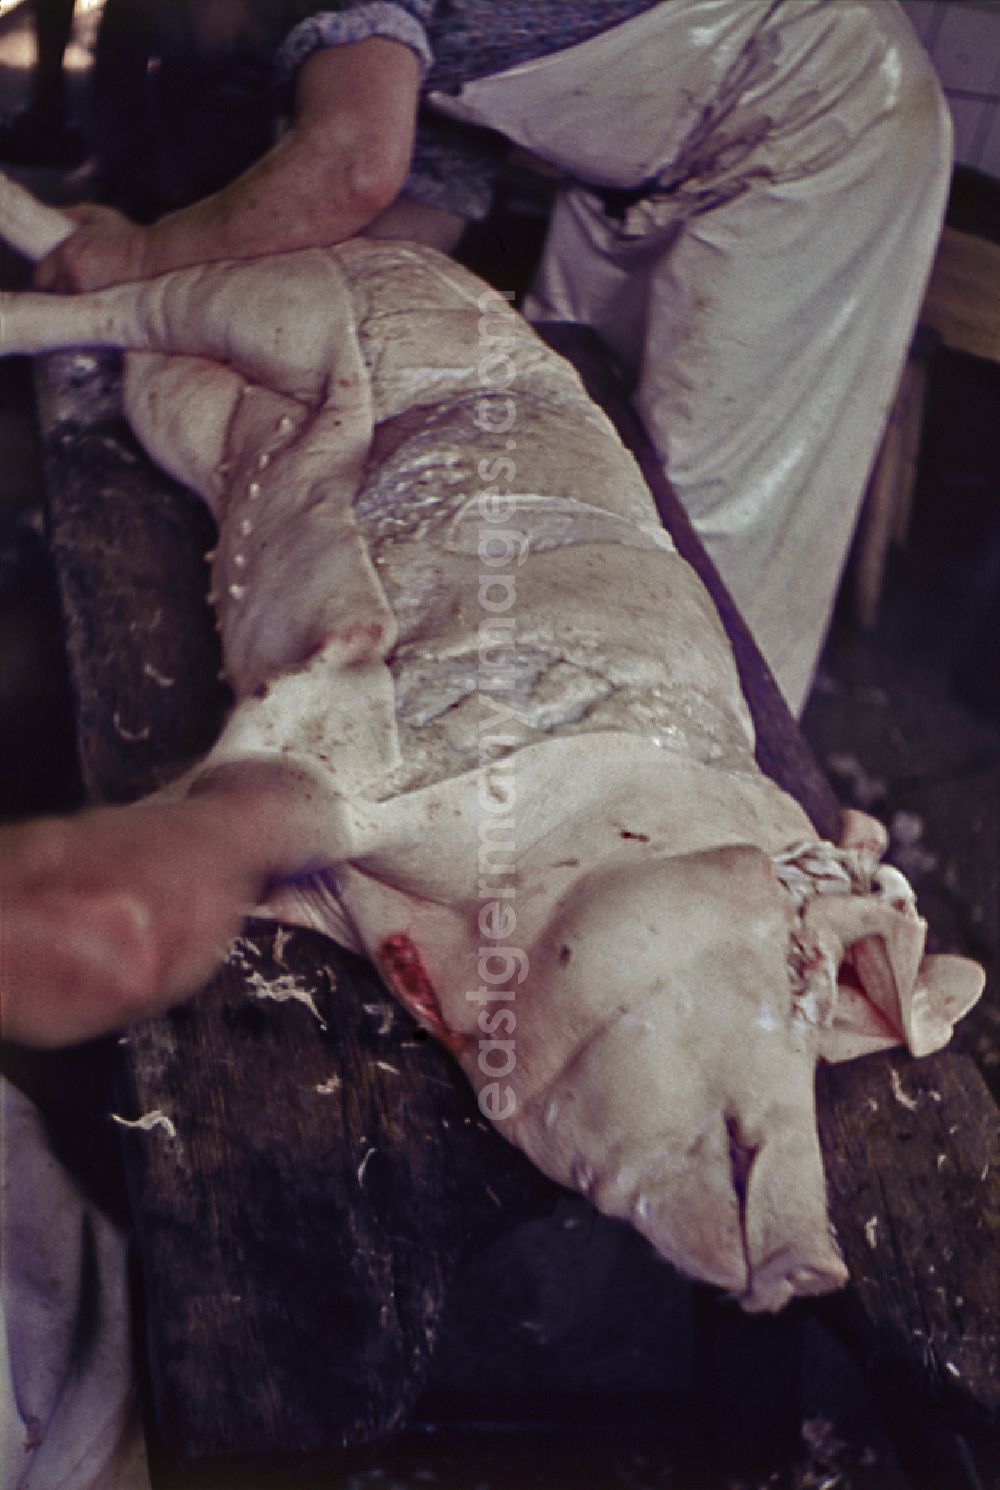 Stechlin: Slaughtering a pig on a rural farm in Stechlin, Brandenburg in the territory of the former GDR, German Democratic Republic. A dead pig lies on its side and a butcher is working on its hind leg